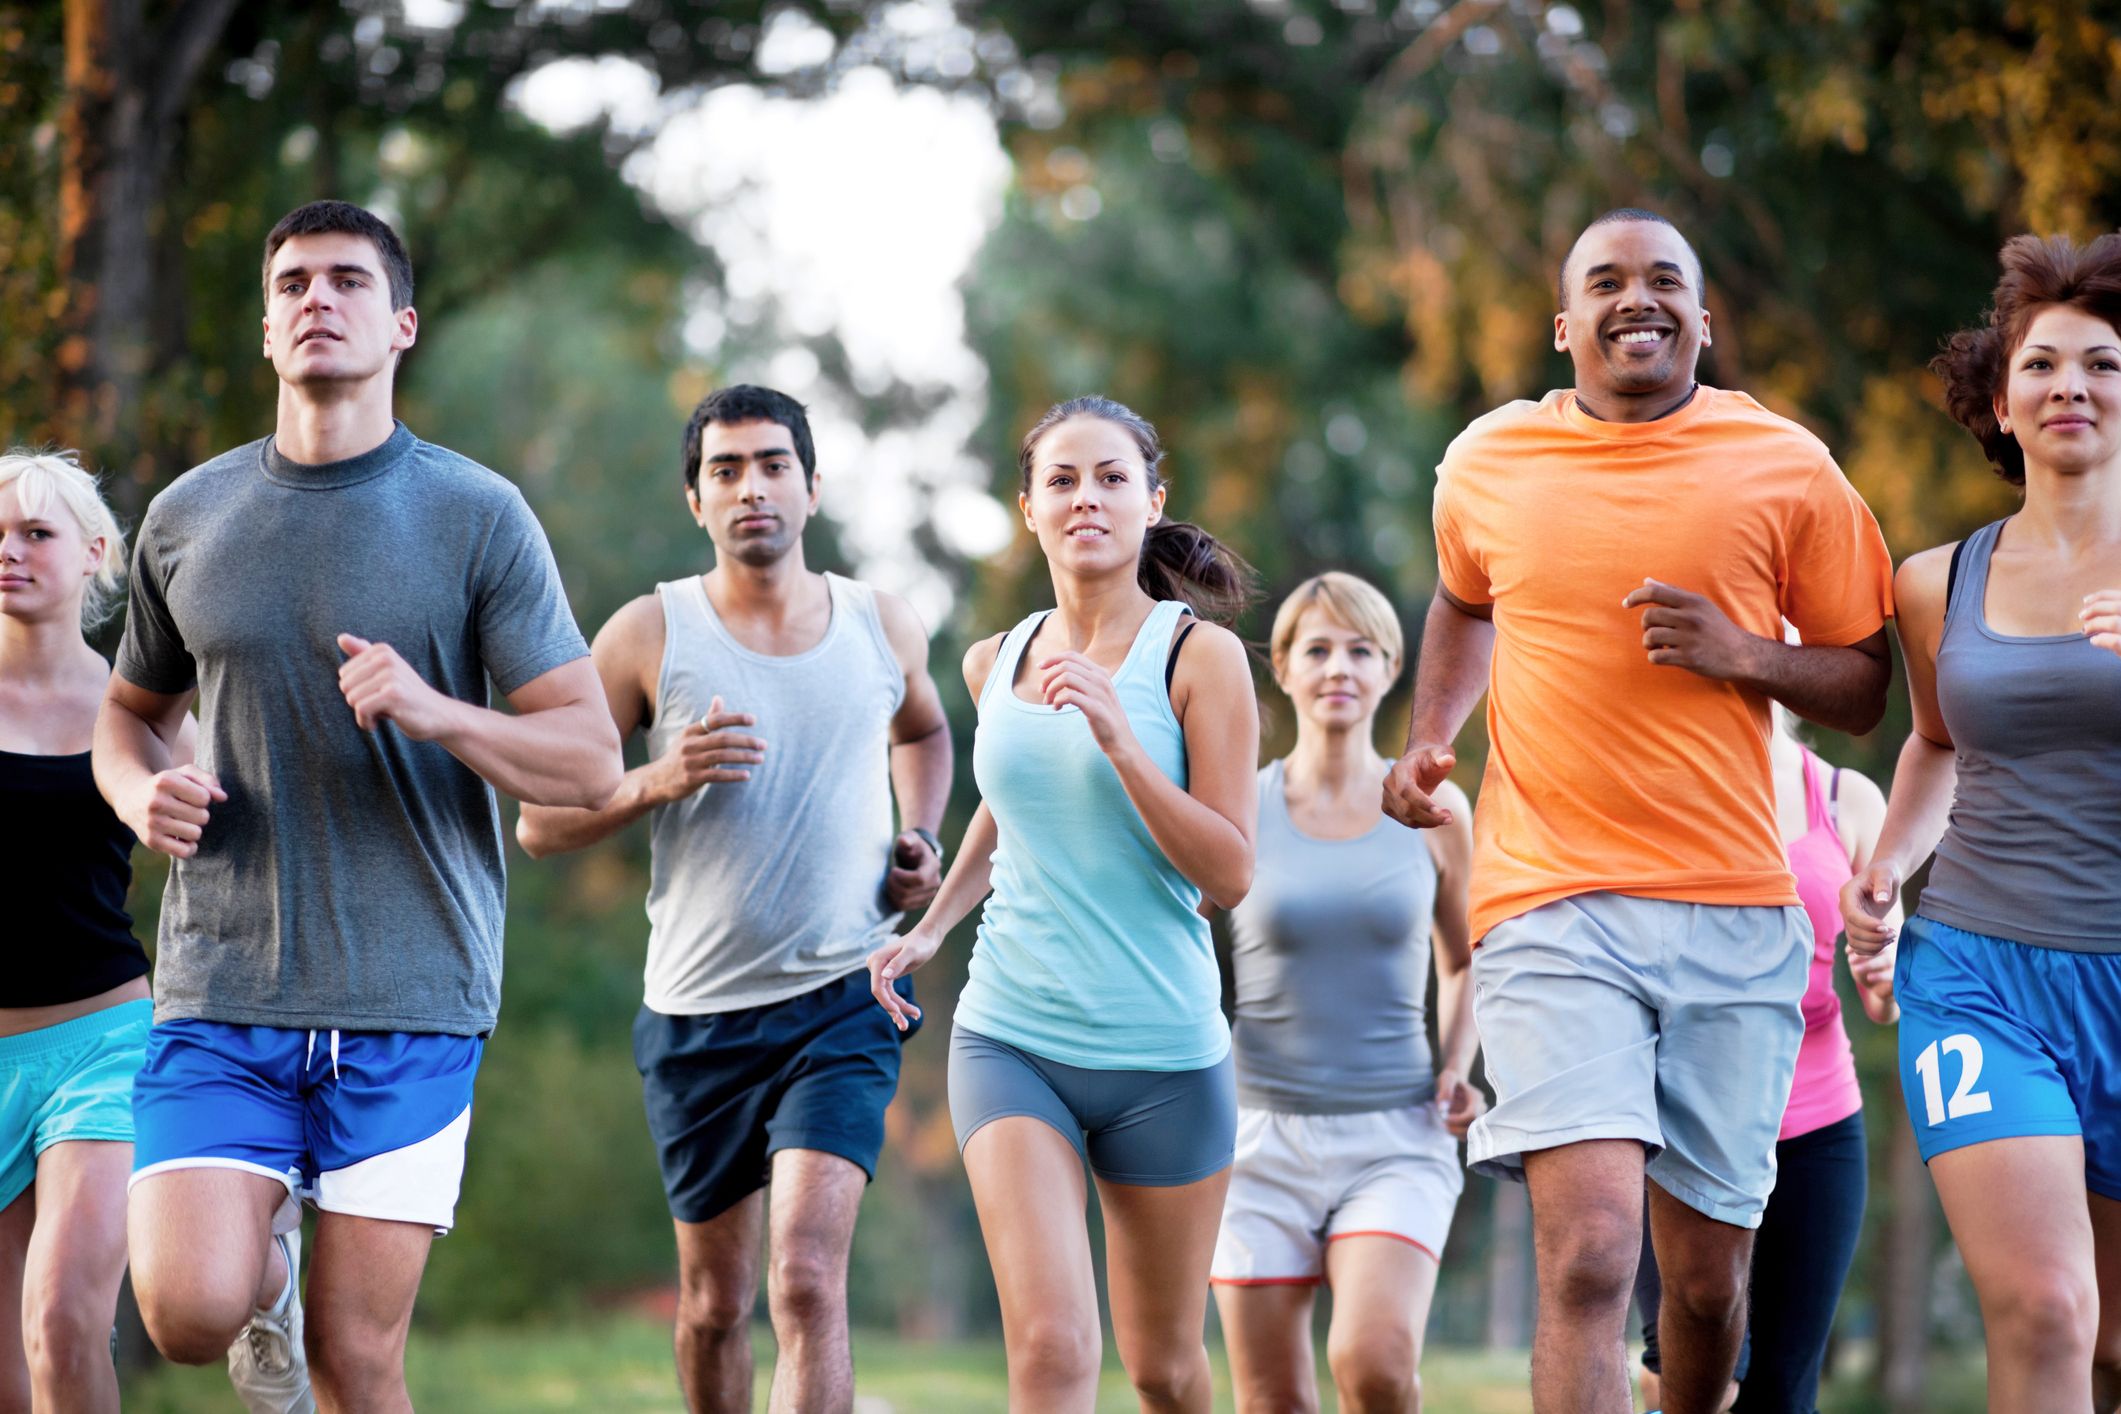 Run Clubs Offer the Social Connections We Need for Self Care